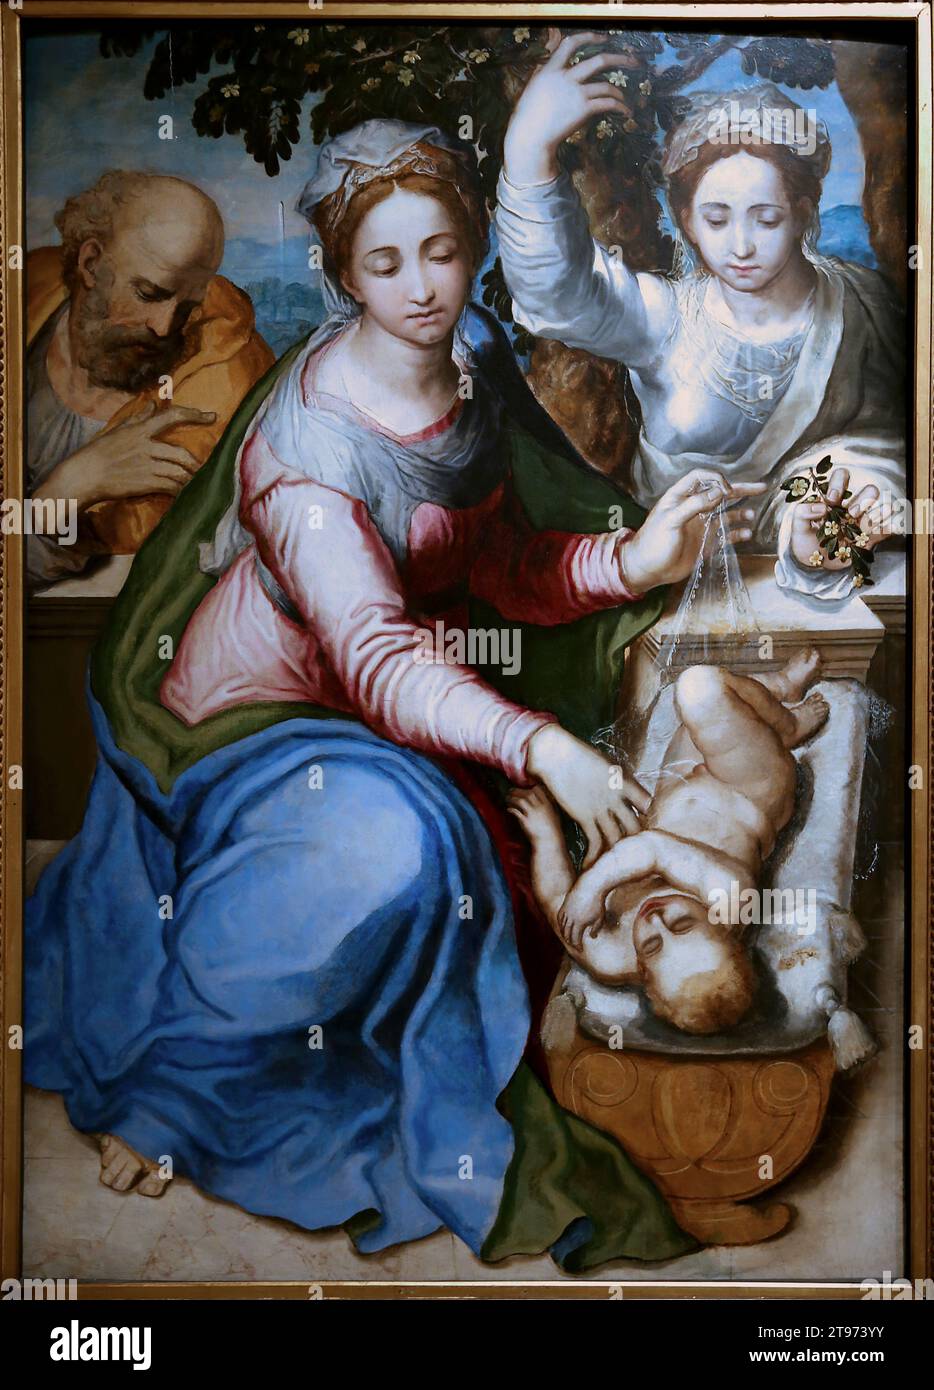 Holy Family and a Saint. C. 1560. Oil on panel. Marco Pino, Marco da Siena (1521 - 1583). Museum of Montserrat, Catalonia, Spain. Stock Photo